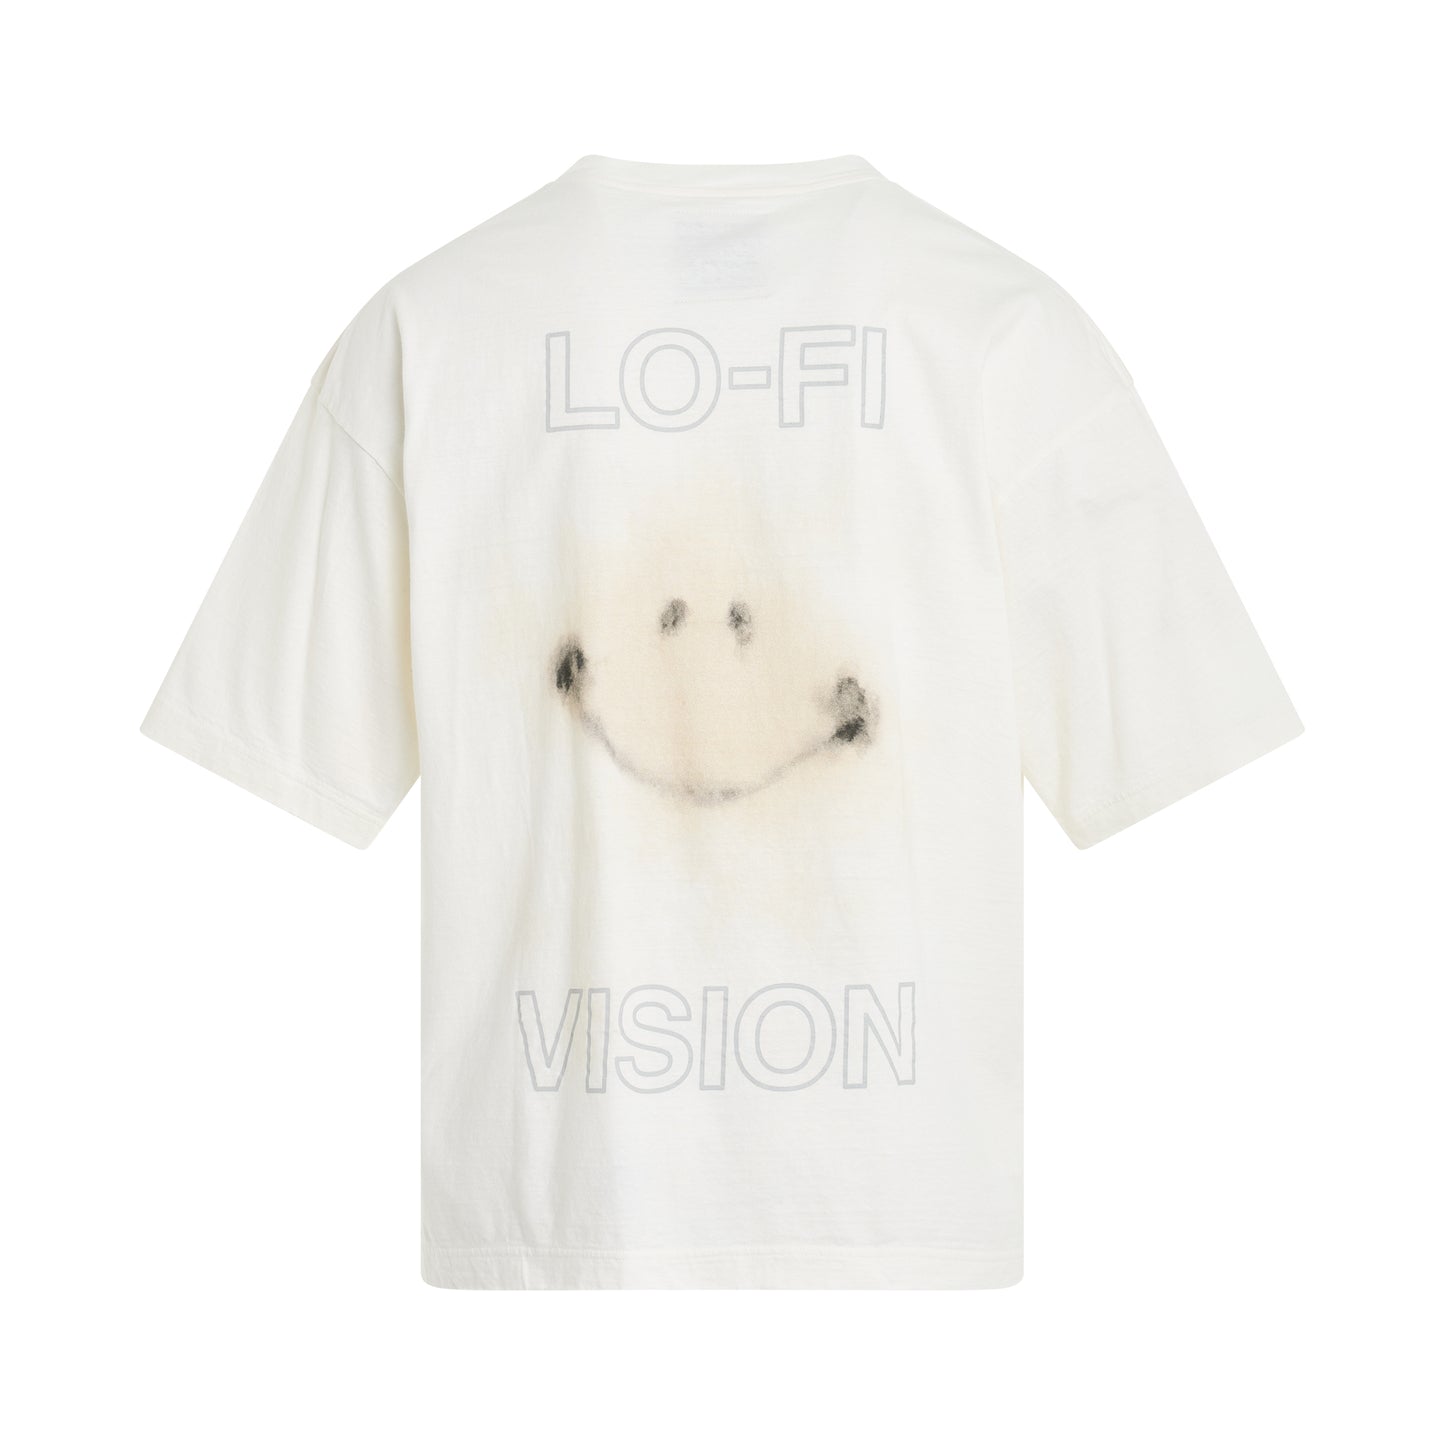 Sad Face Printed T-Shirt in White